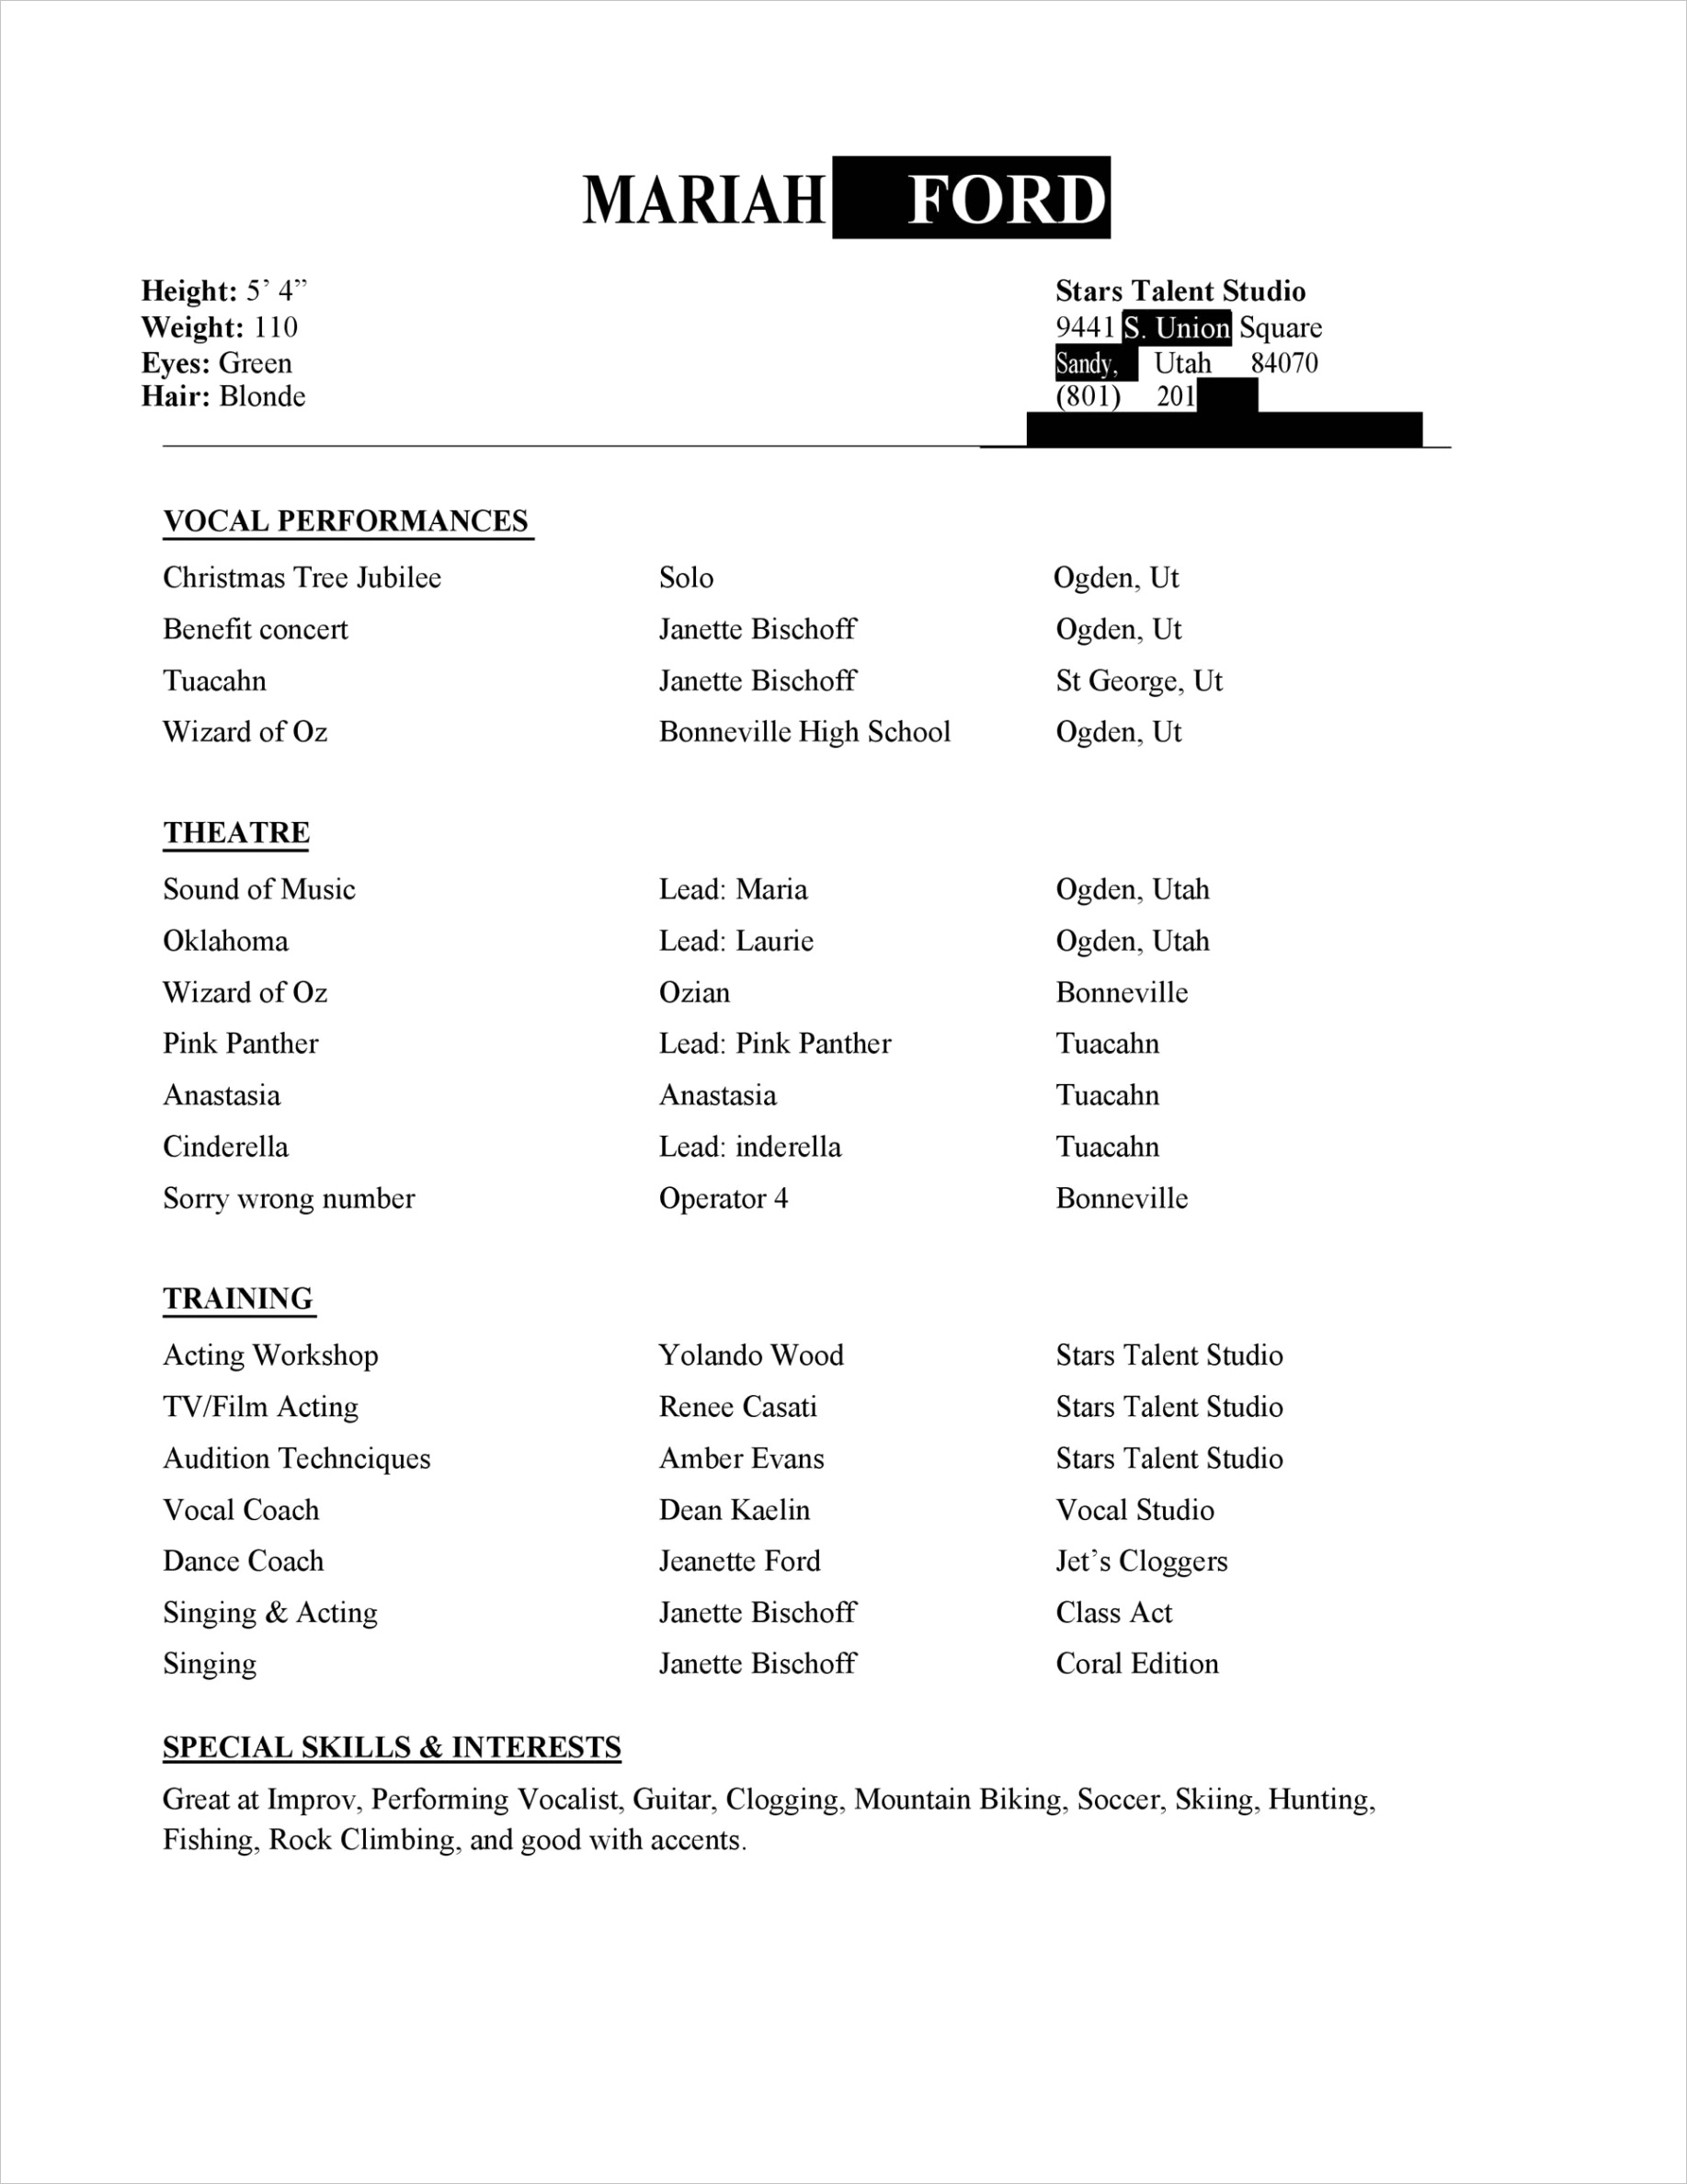 acting resume templates